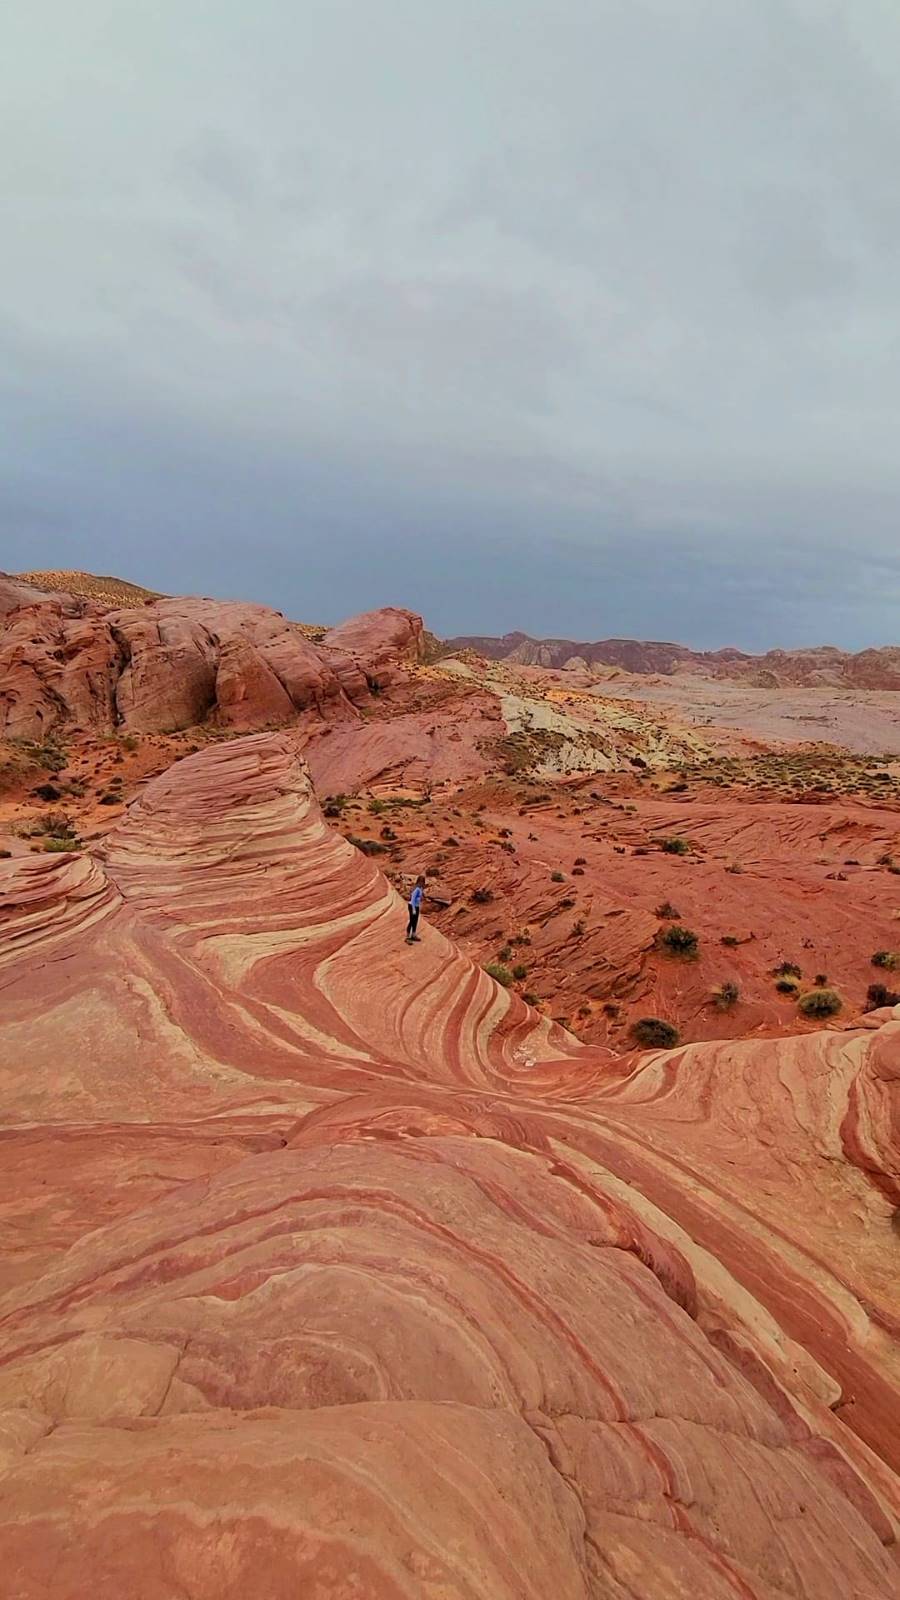 An easy road trip to The Valley of Fire State Park